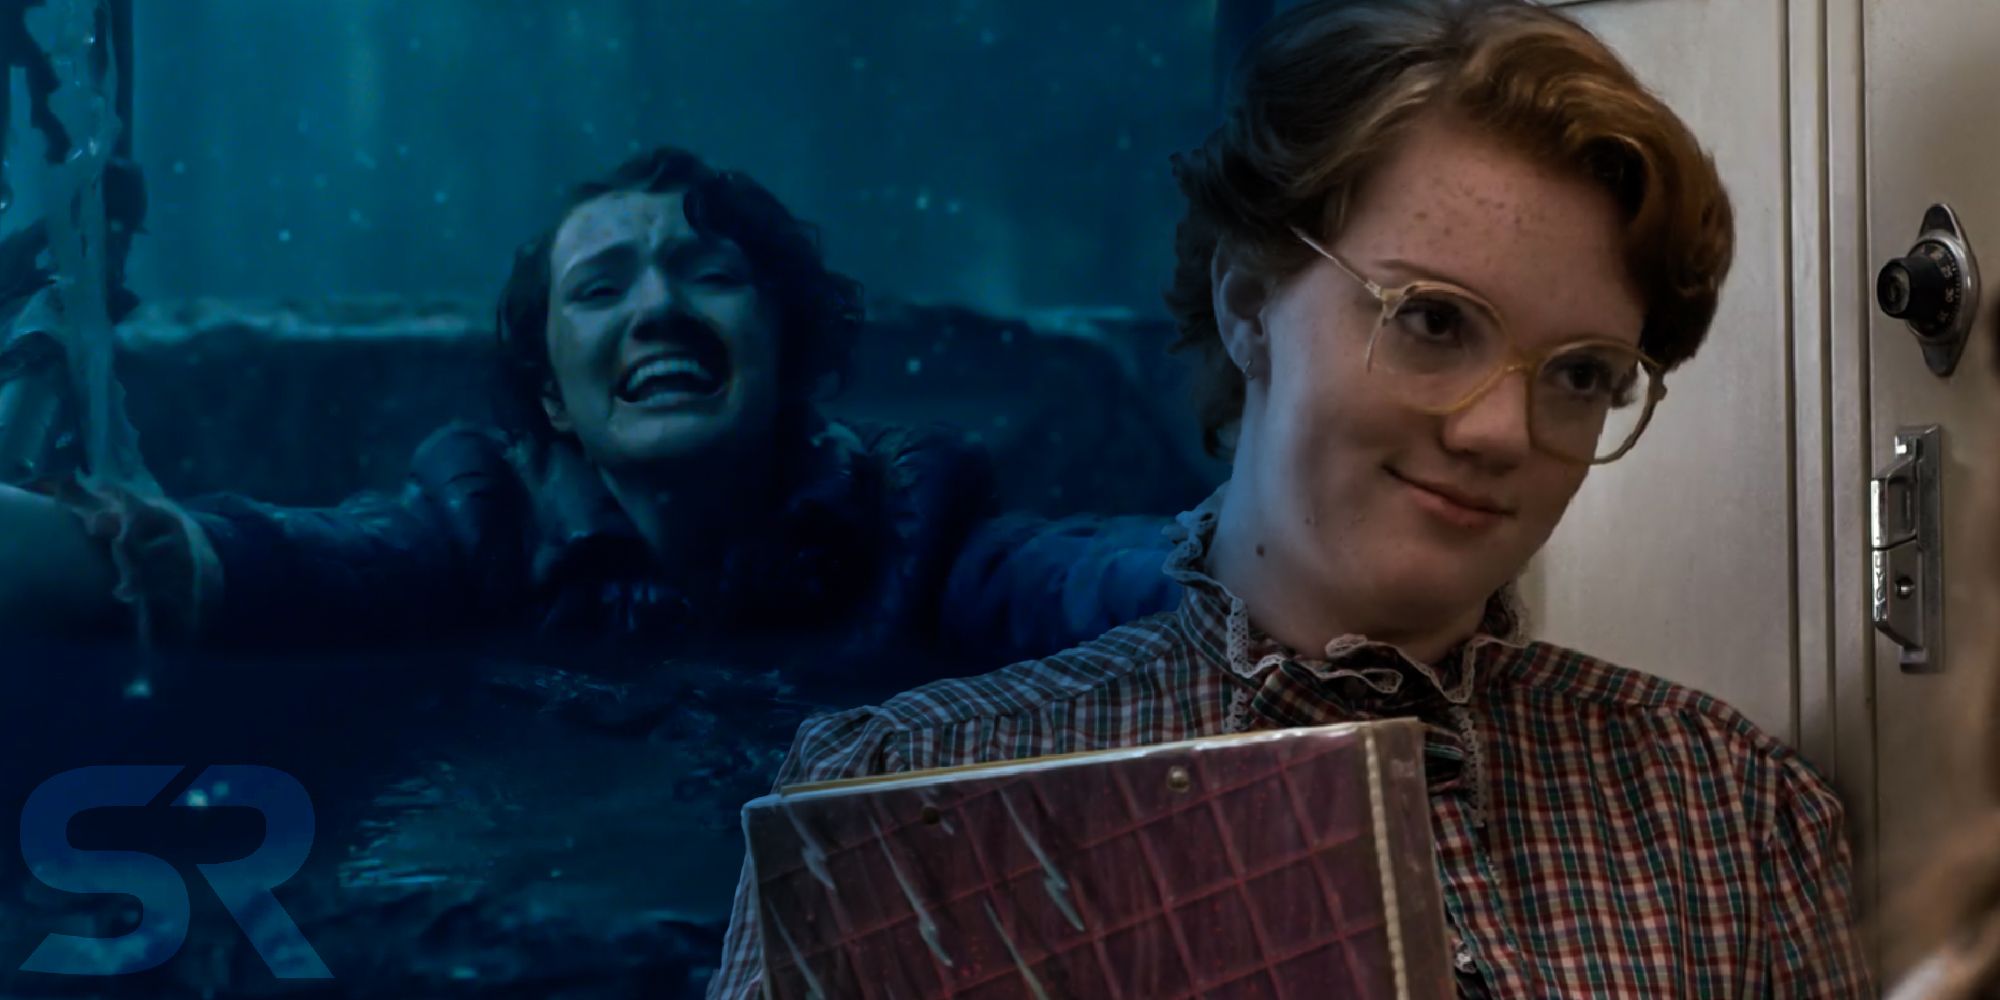 Stranger Things WILL give us Justice for Barb in season 2